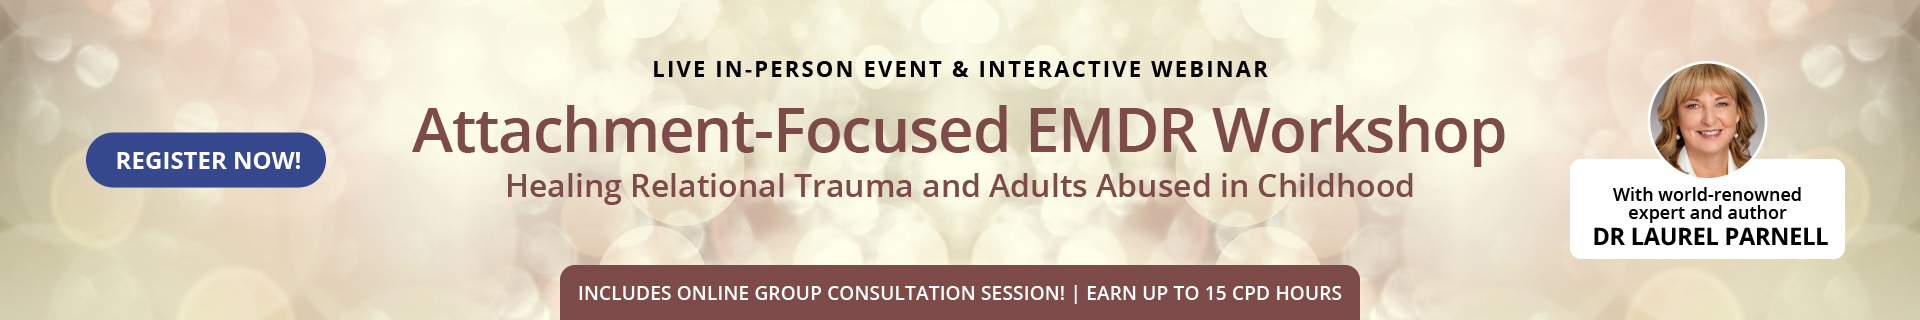 Attachment-Focused EMDR Workshop : An Evidence-Based Approach to Treat PTSD and Related Conditions